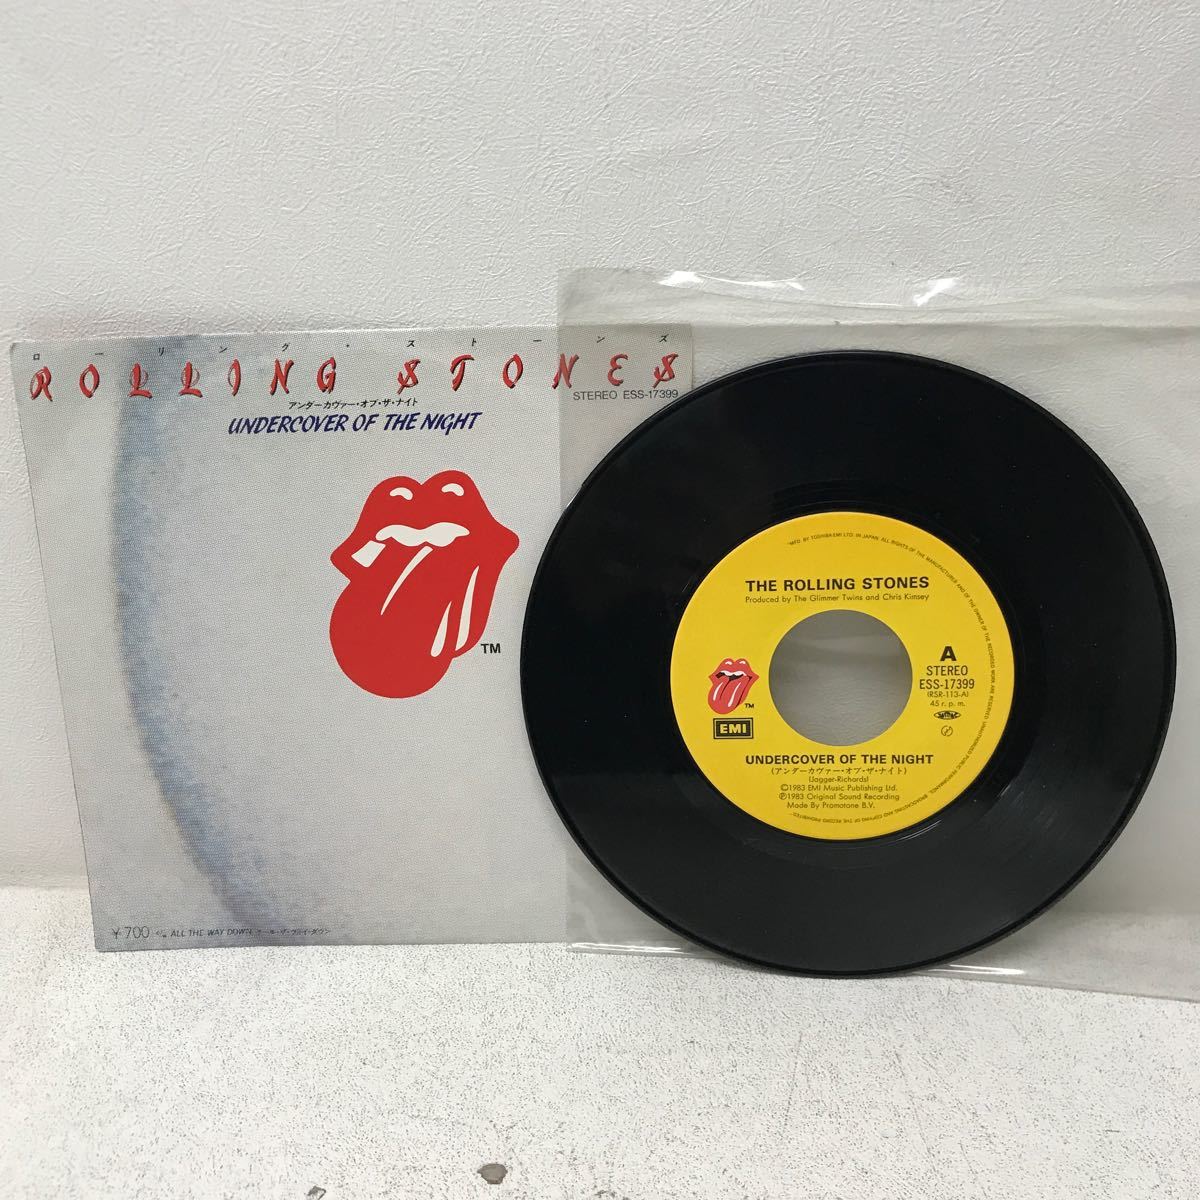 I1128F3 ローリング・ストーンズ ROLLING STONES EP レコード 3巻セット 音楽 洋楽 ロック / UNDERCOVER OF THE NIGHT / TELL ME 他_画像2